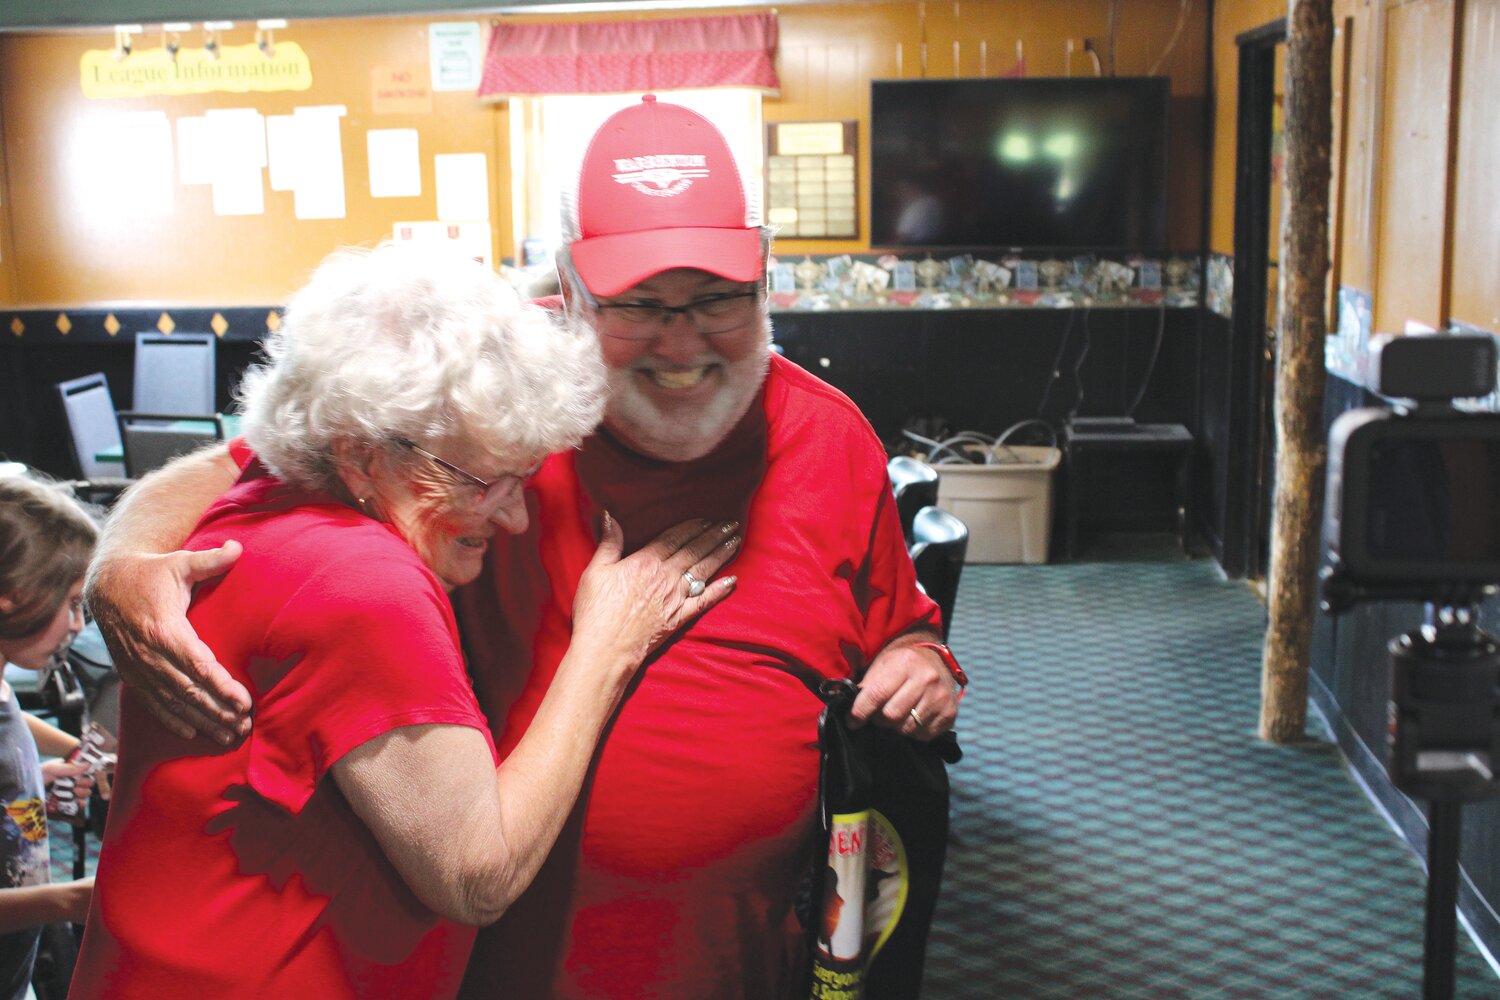 Hidden Hero Rich Barton gets a hug from Linda Staggs, the woman who made the nomination.